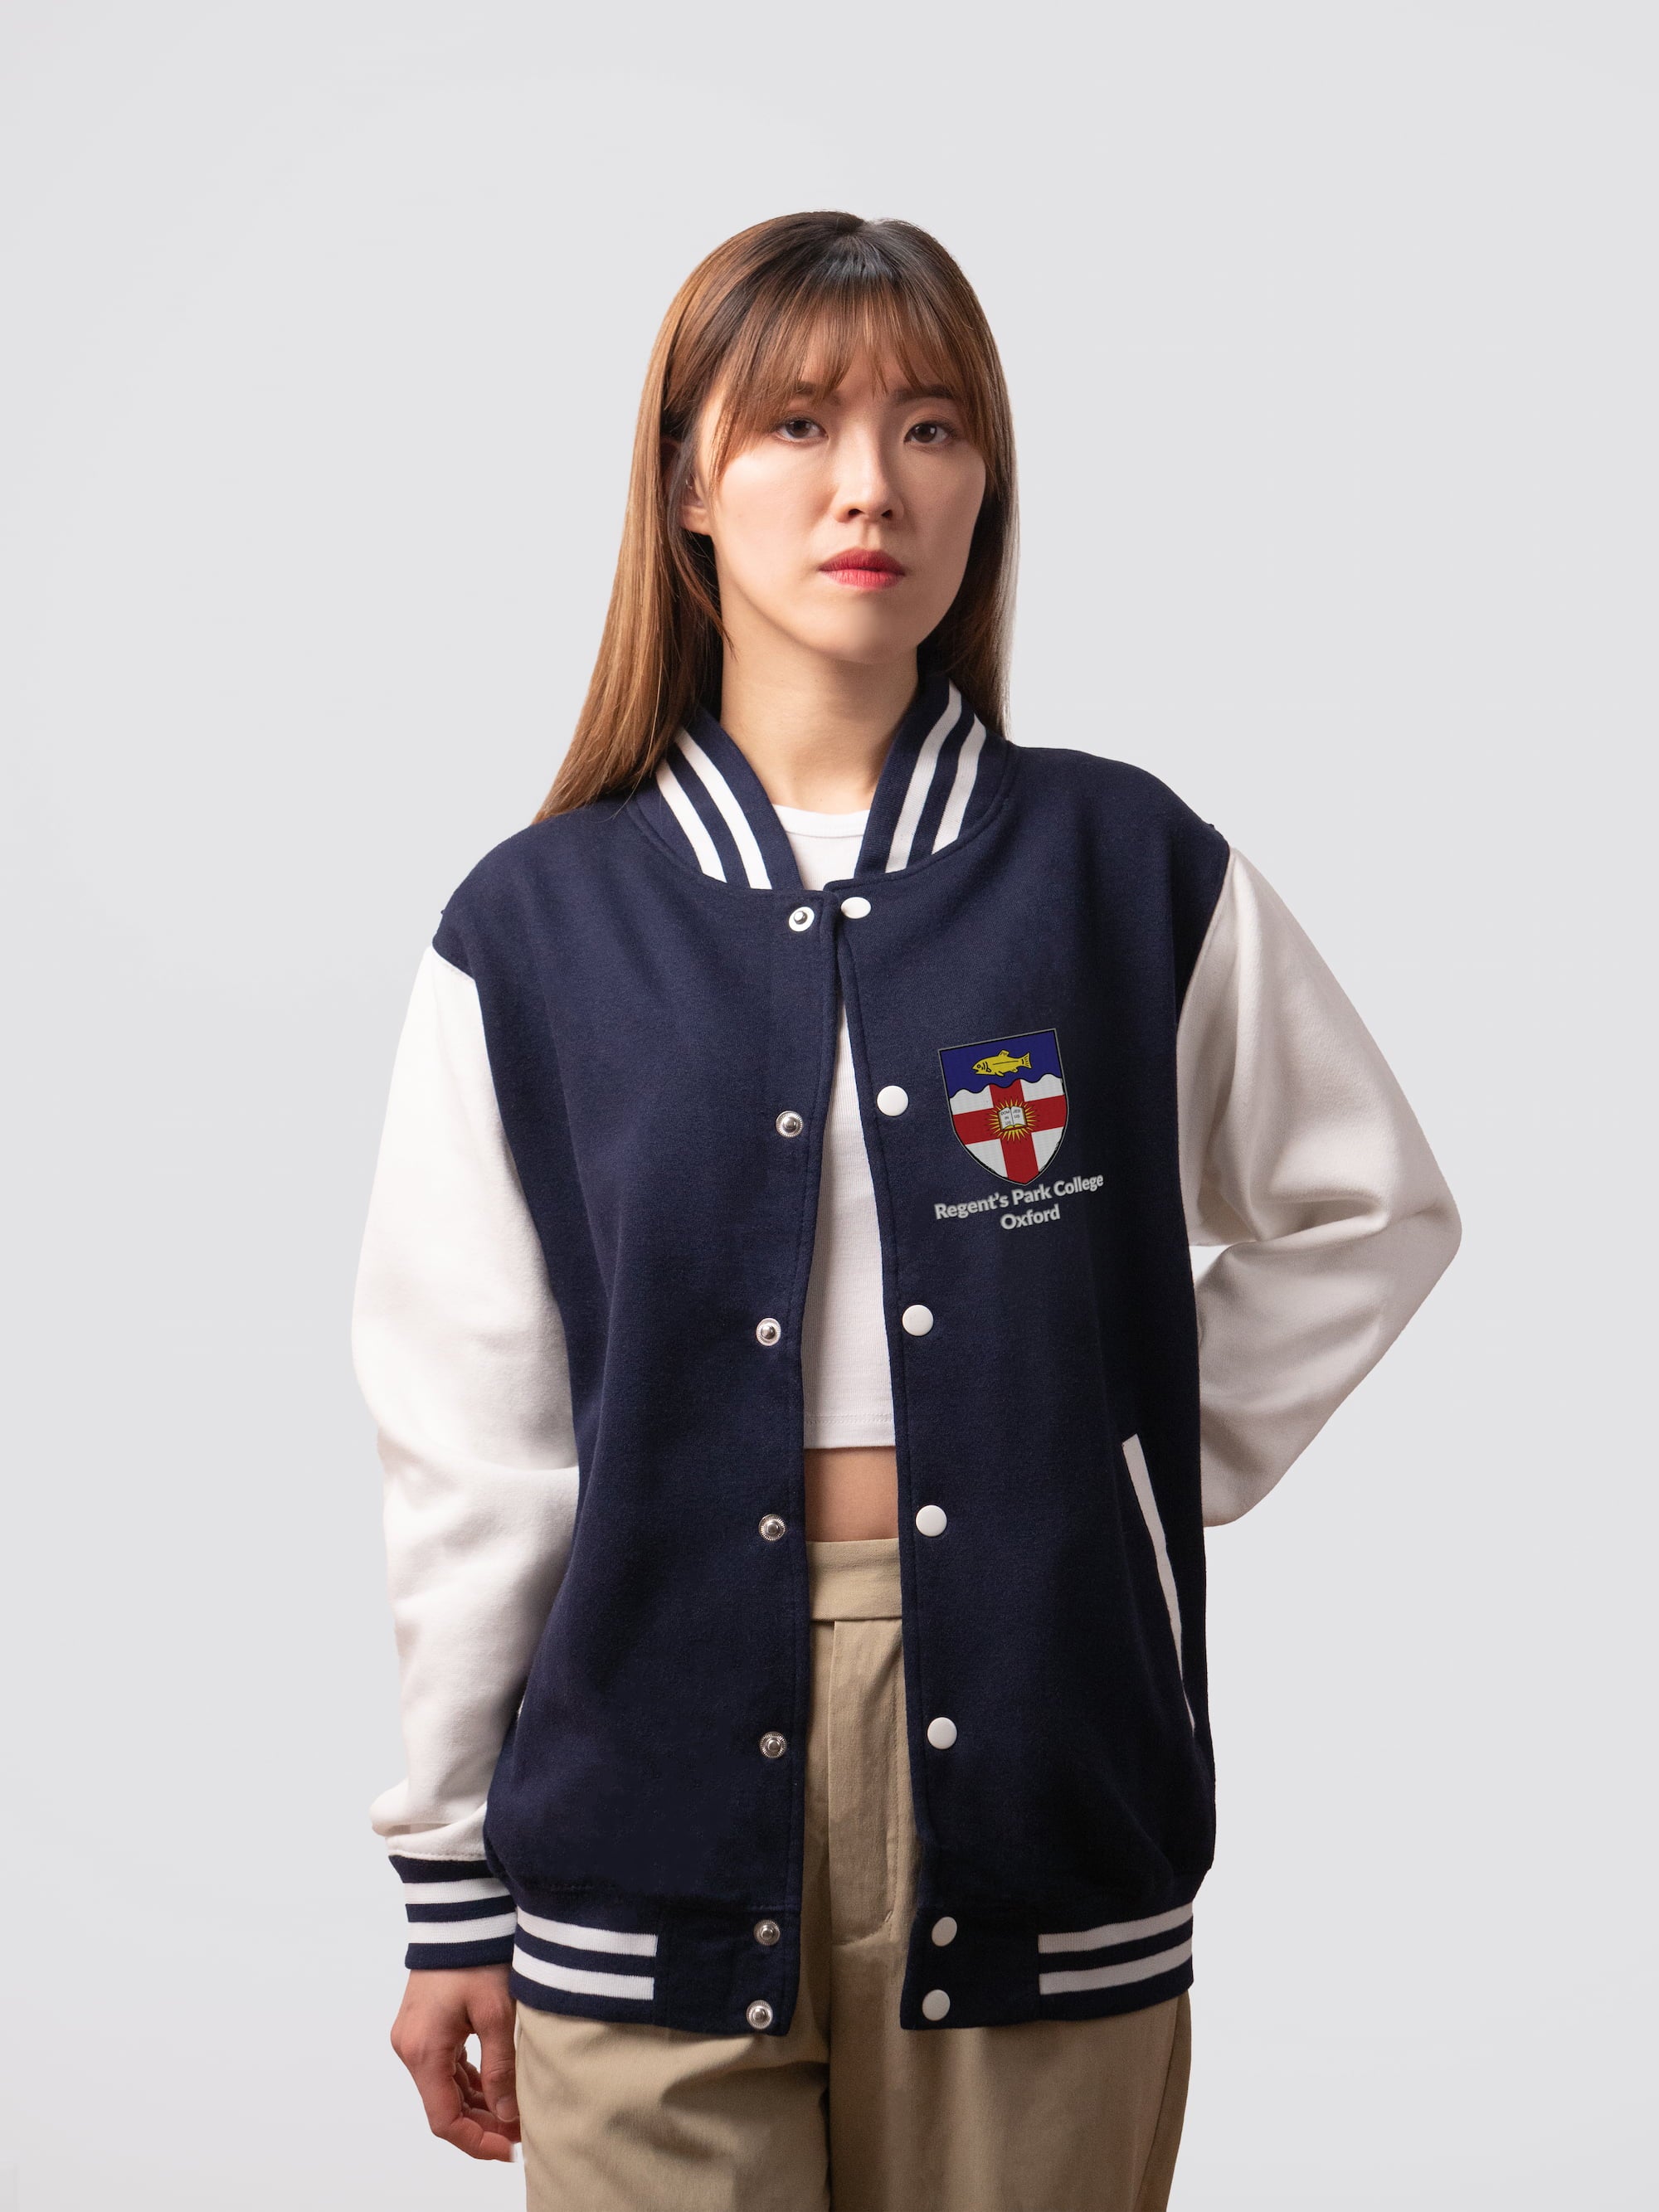 Retro style varsity jacket, with embroidered Regent's Park crest